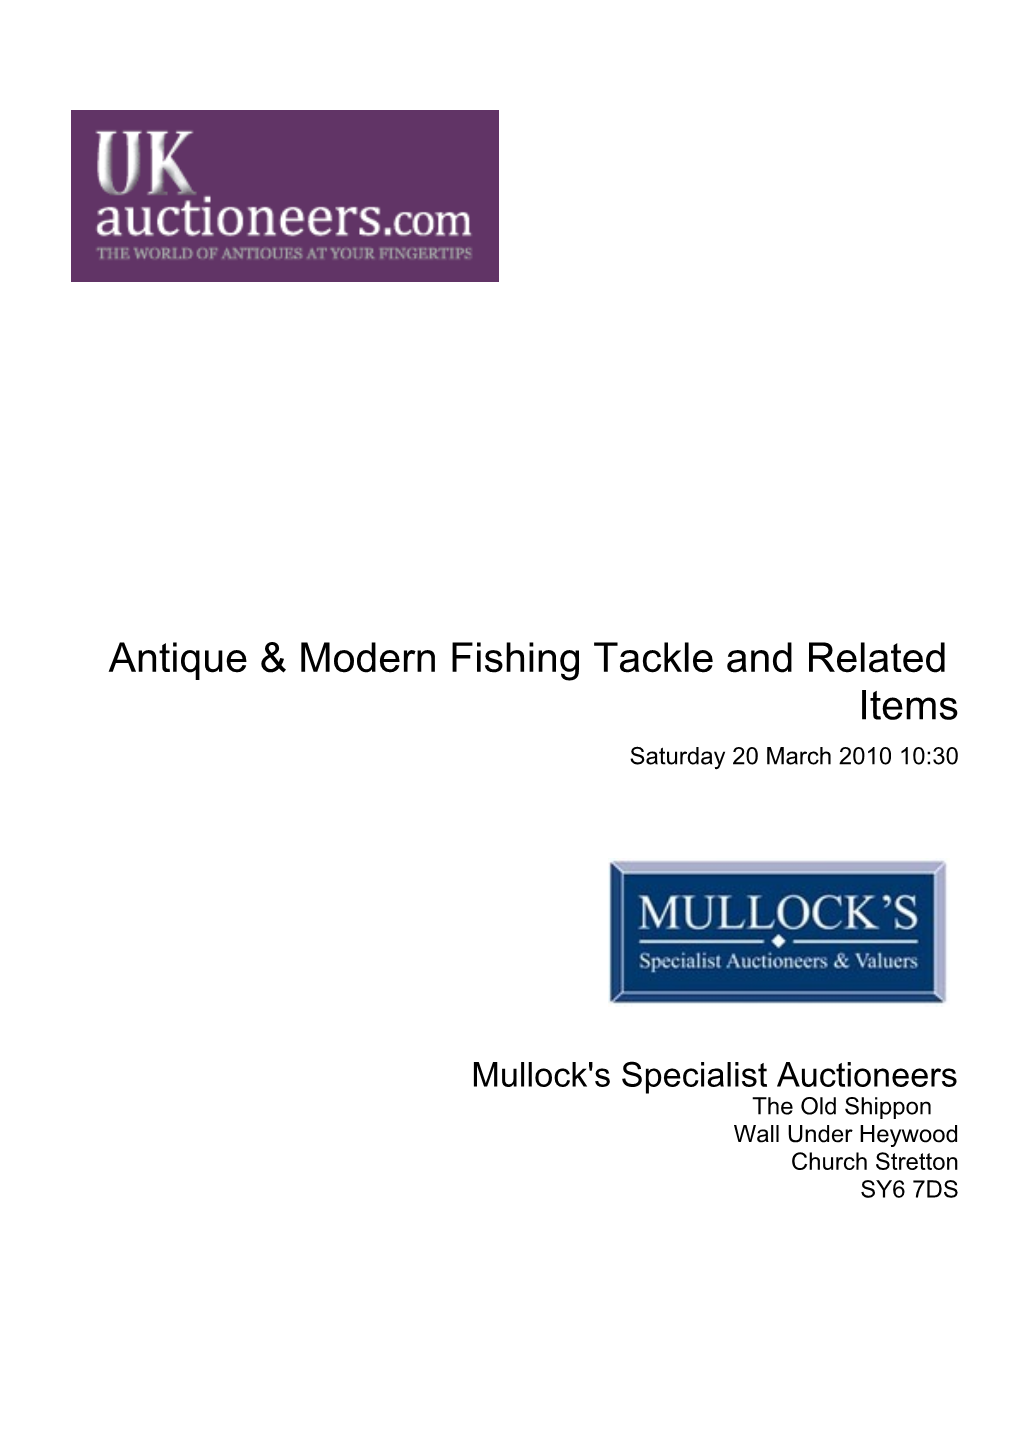 Antique & Modern Fishing Tackle and Related Items